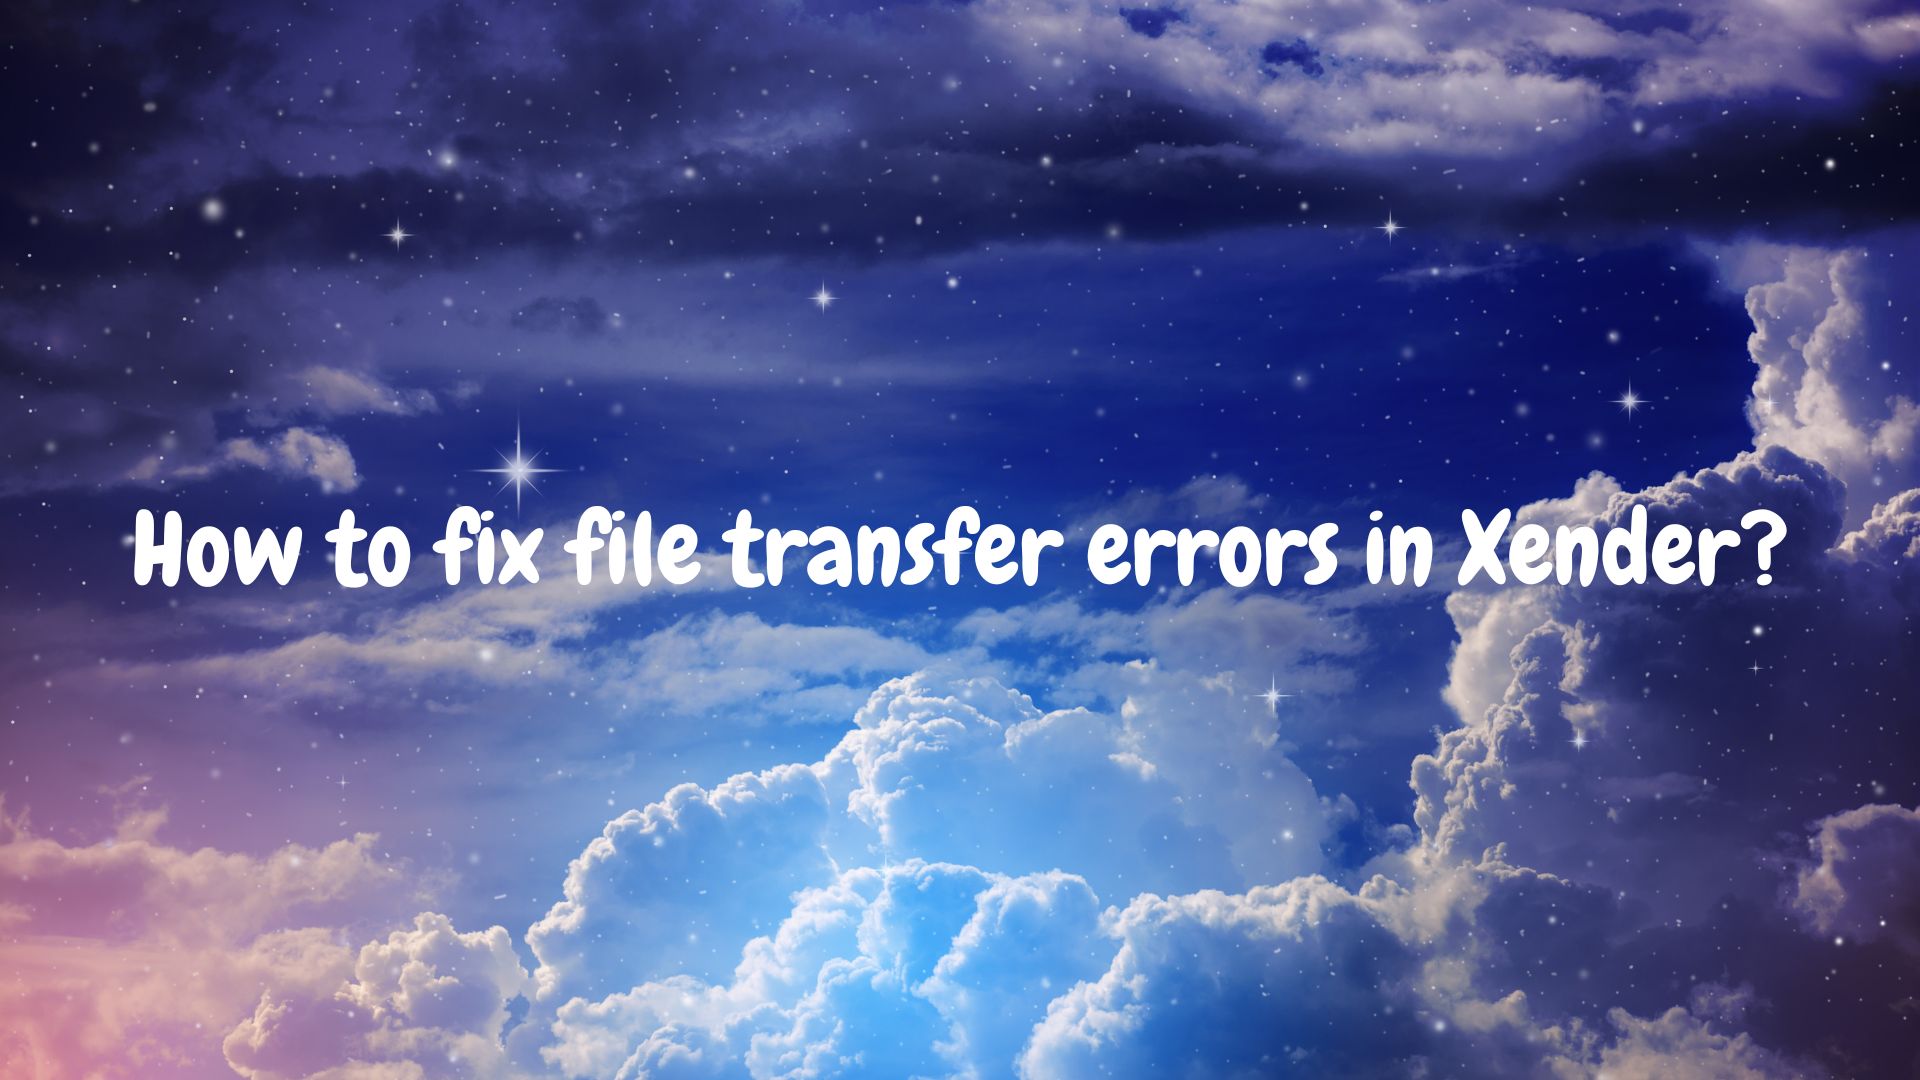 How to fix file transfer errors in Xender?